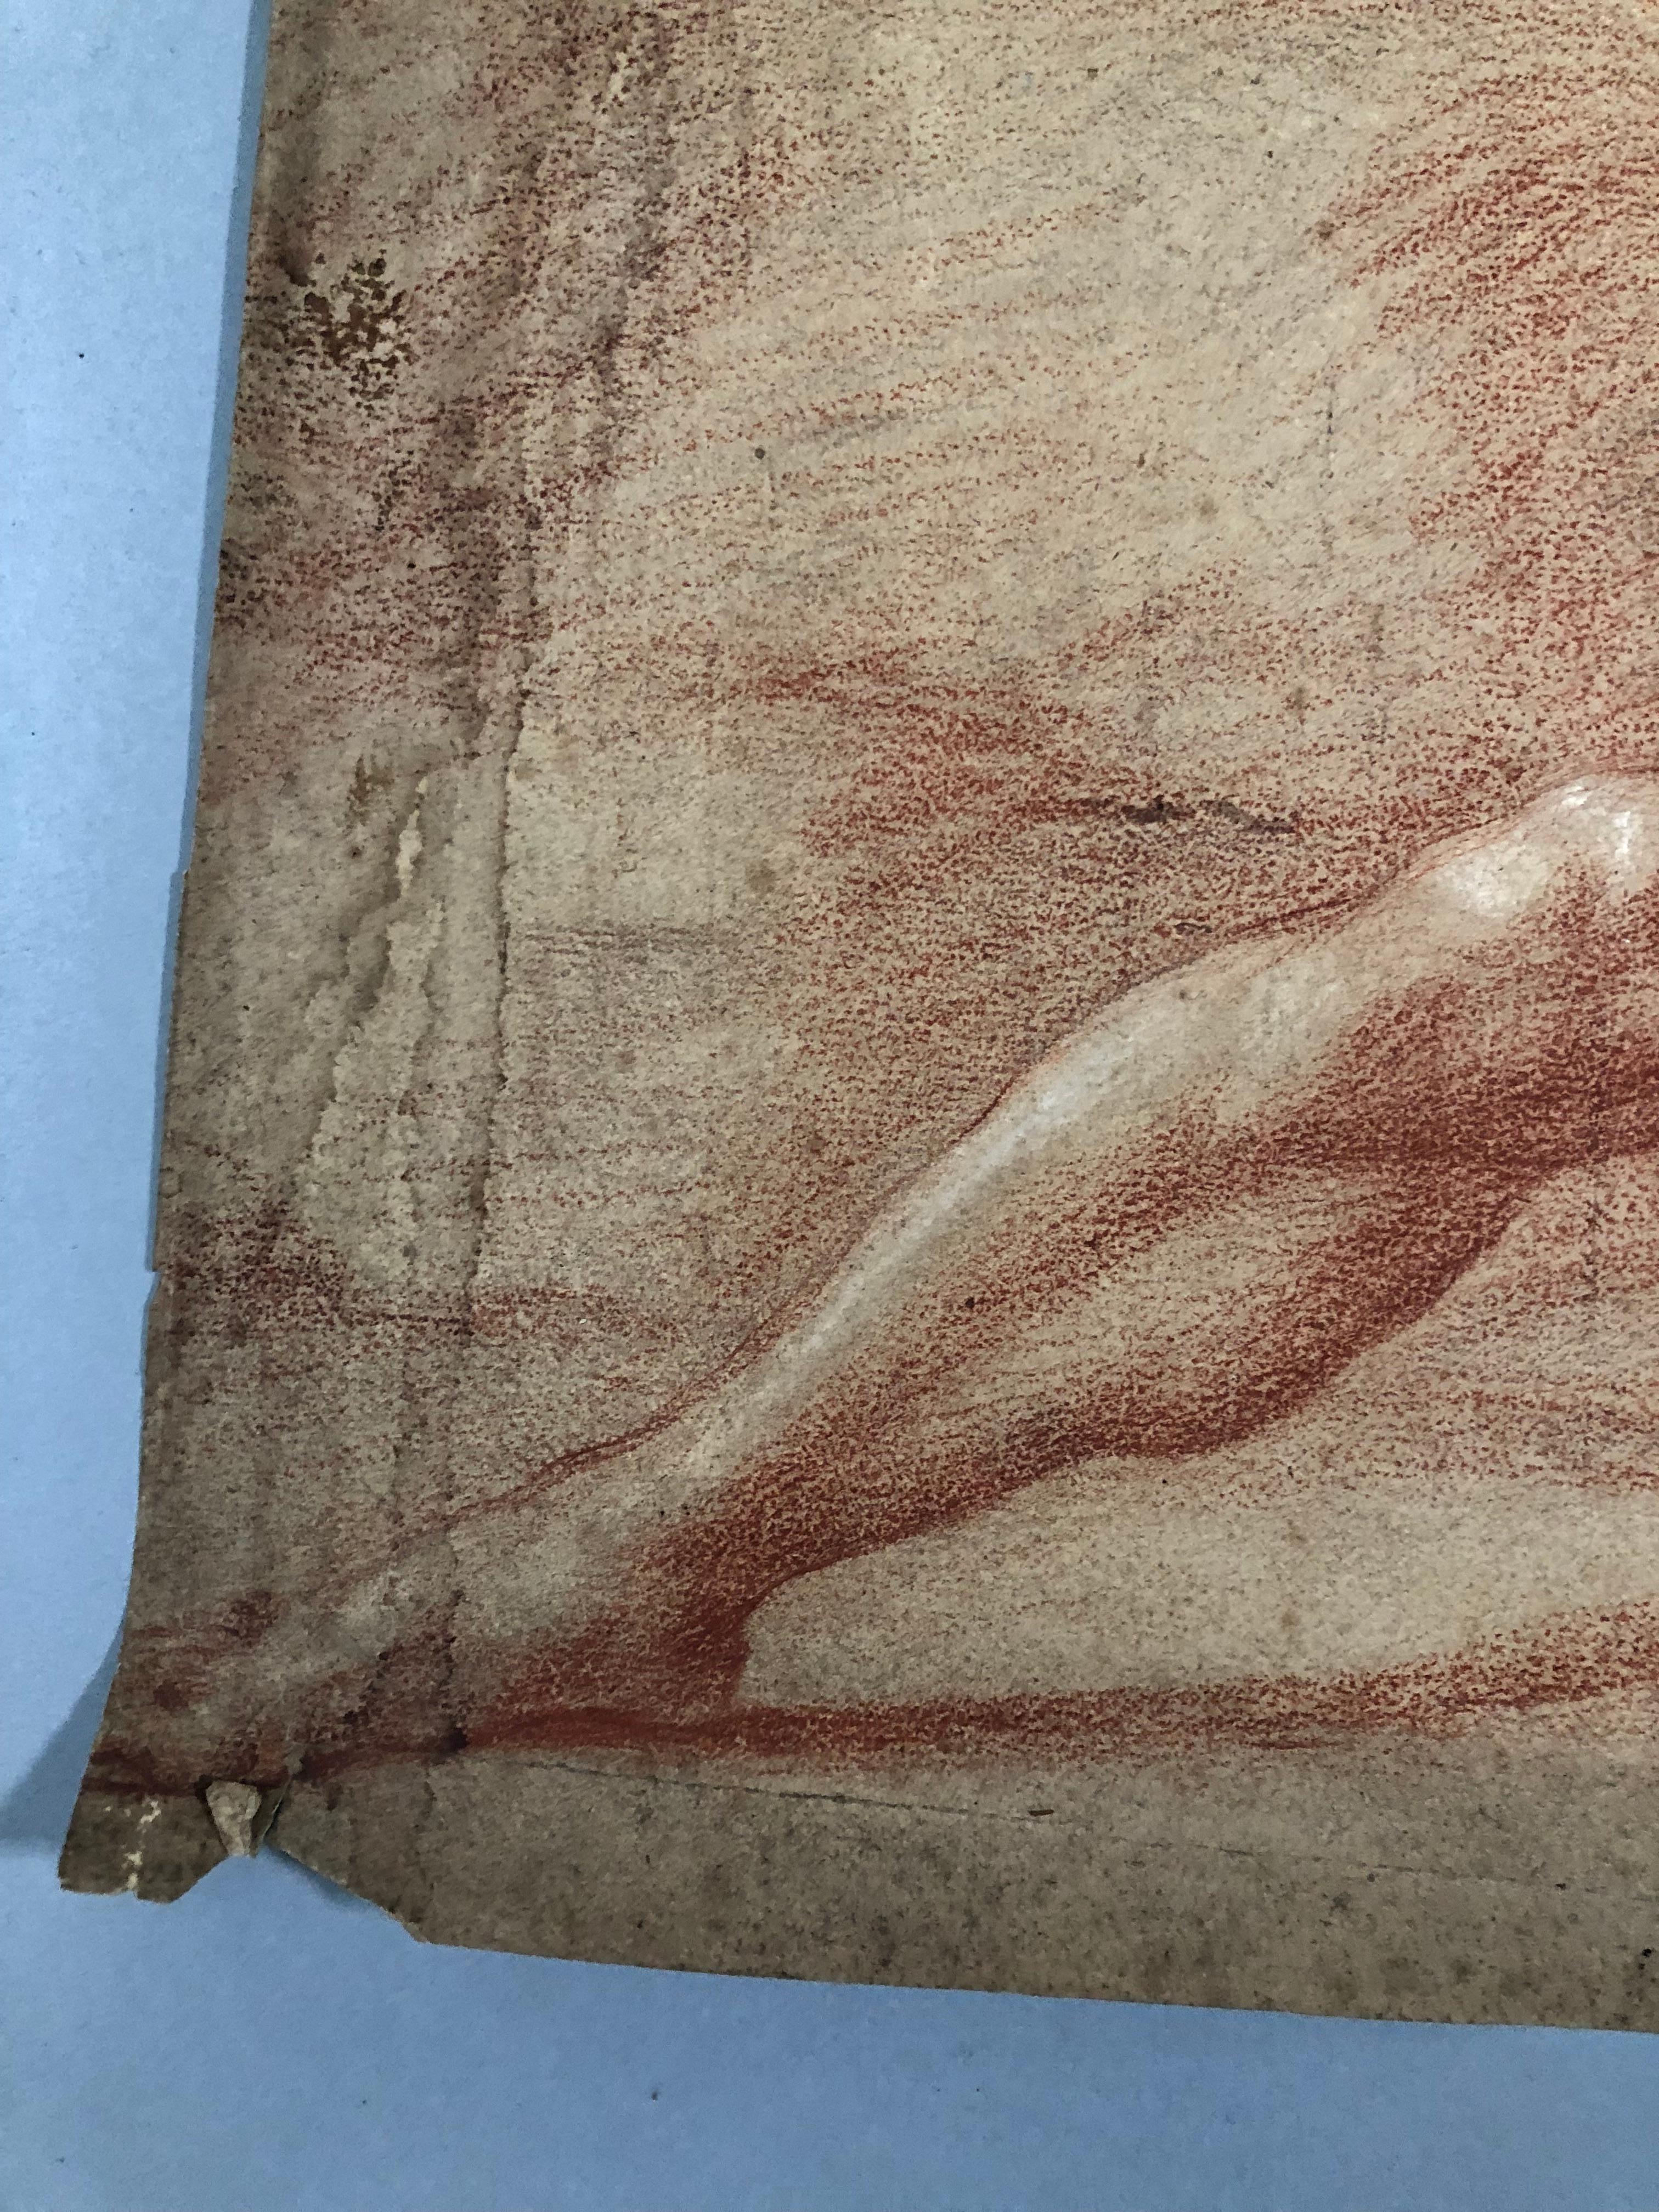 FRENCH SCHOOL 17th Century. Study of a naked man. Sanguine. Dated 1680
This item comes unframed and needs to be restored.